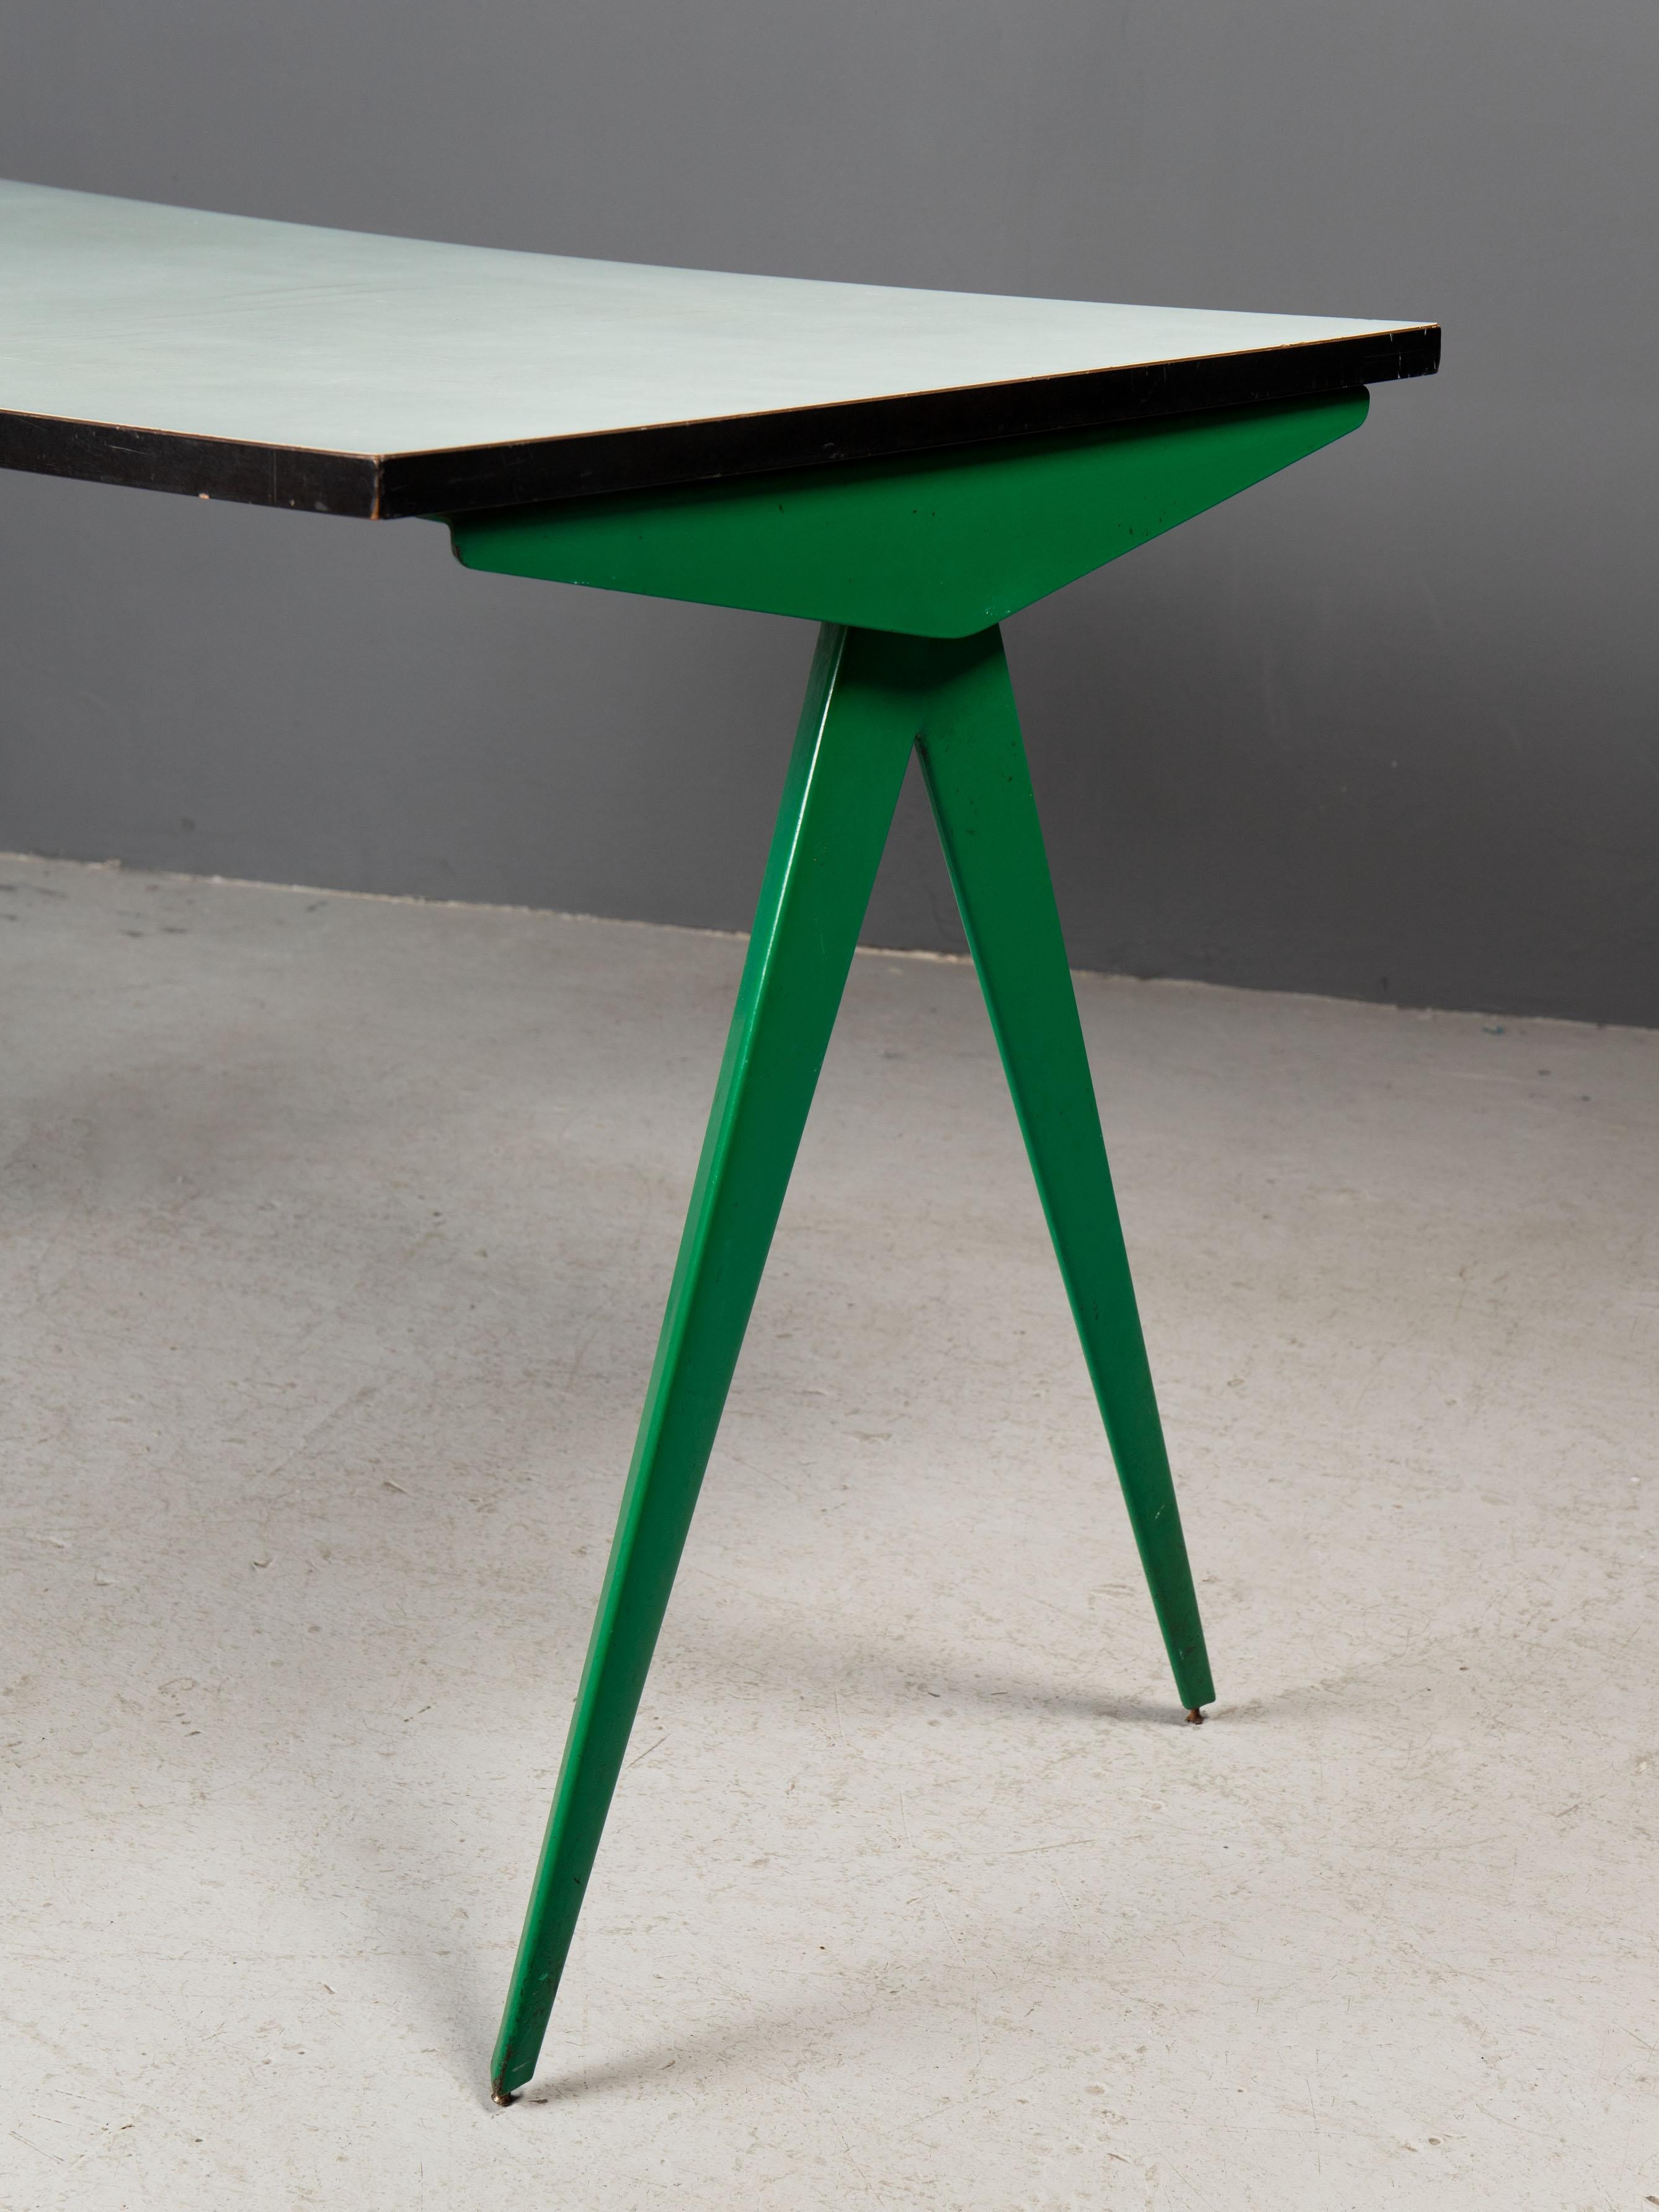 Elegant green desk by Jean Prouvé in green color. Original untouched condition, produced by Atelier Jean Prouvé in 1950s.